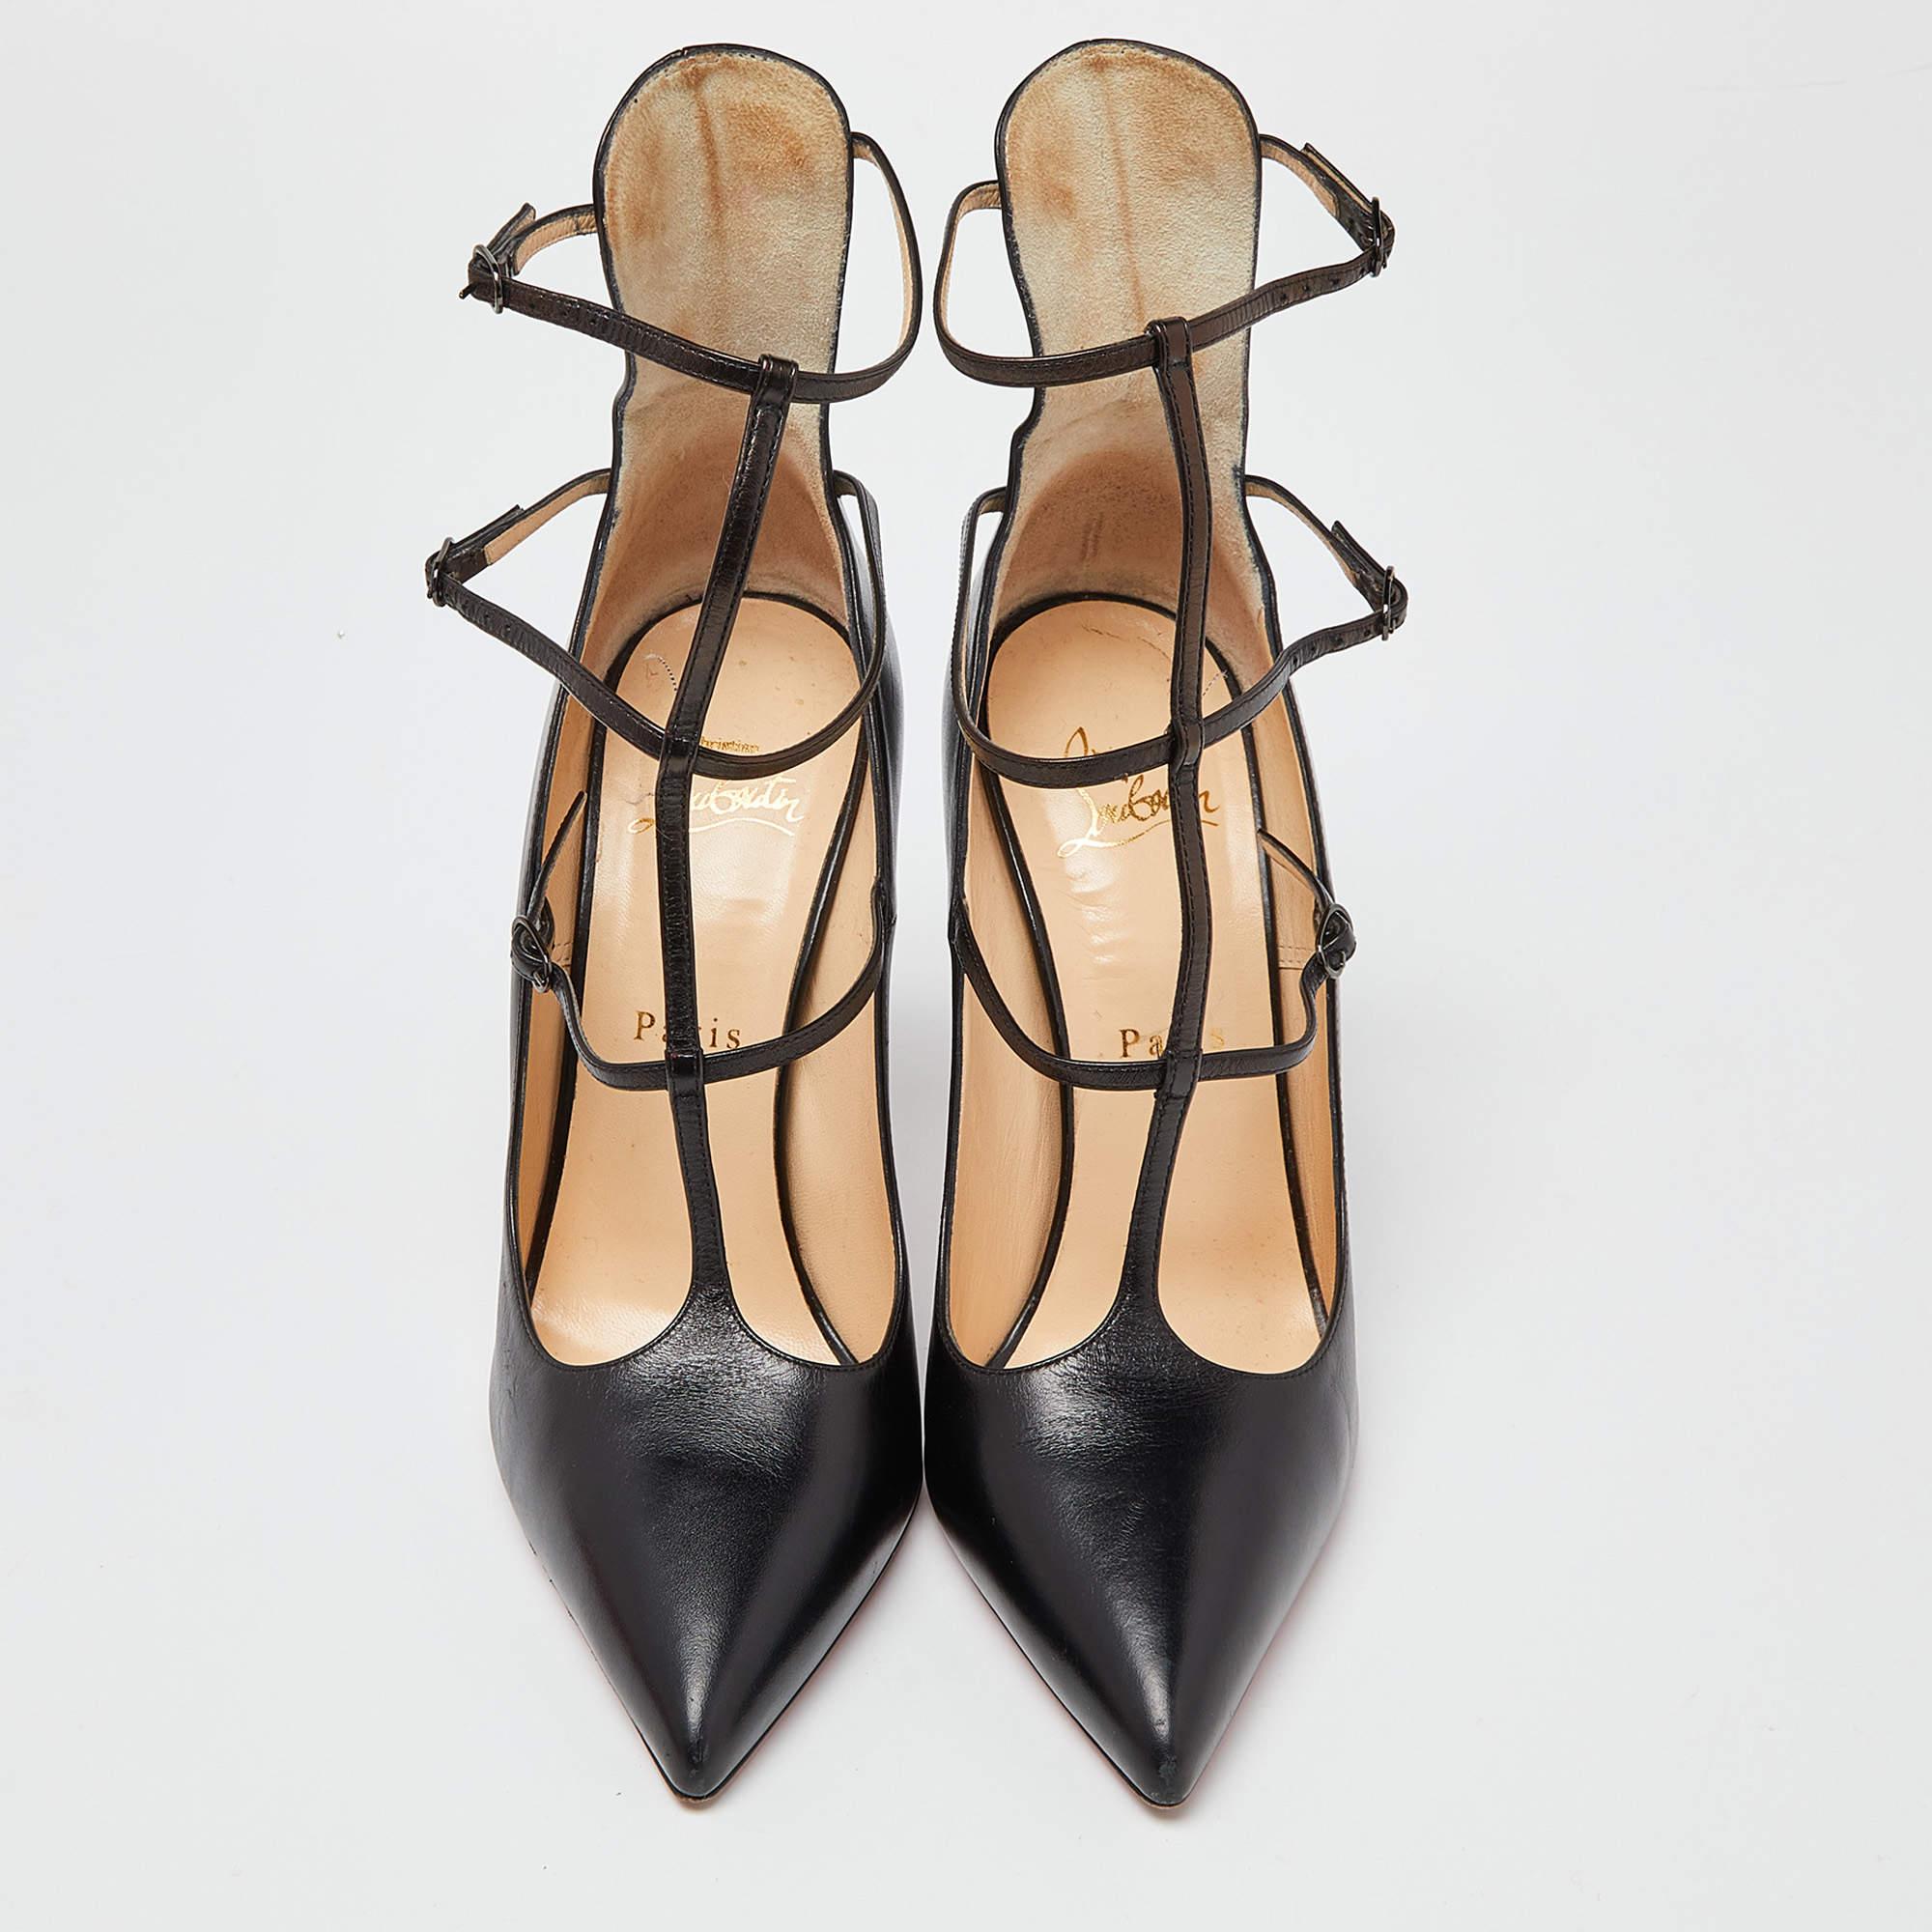 Make a chic style statement with these Christian Louboutin black pumps. They showcase sleek heels and red soles, perfect for your fashionable outings!

Includes
Original Dustbag, Extra Heel Tips